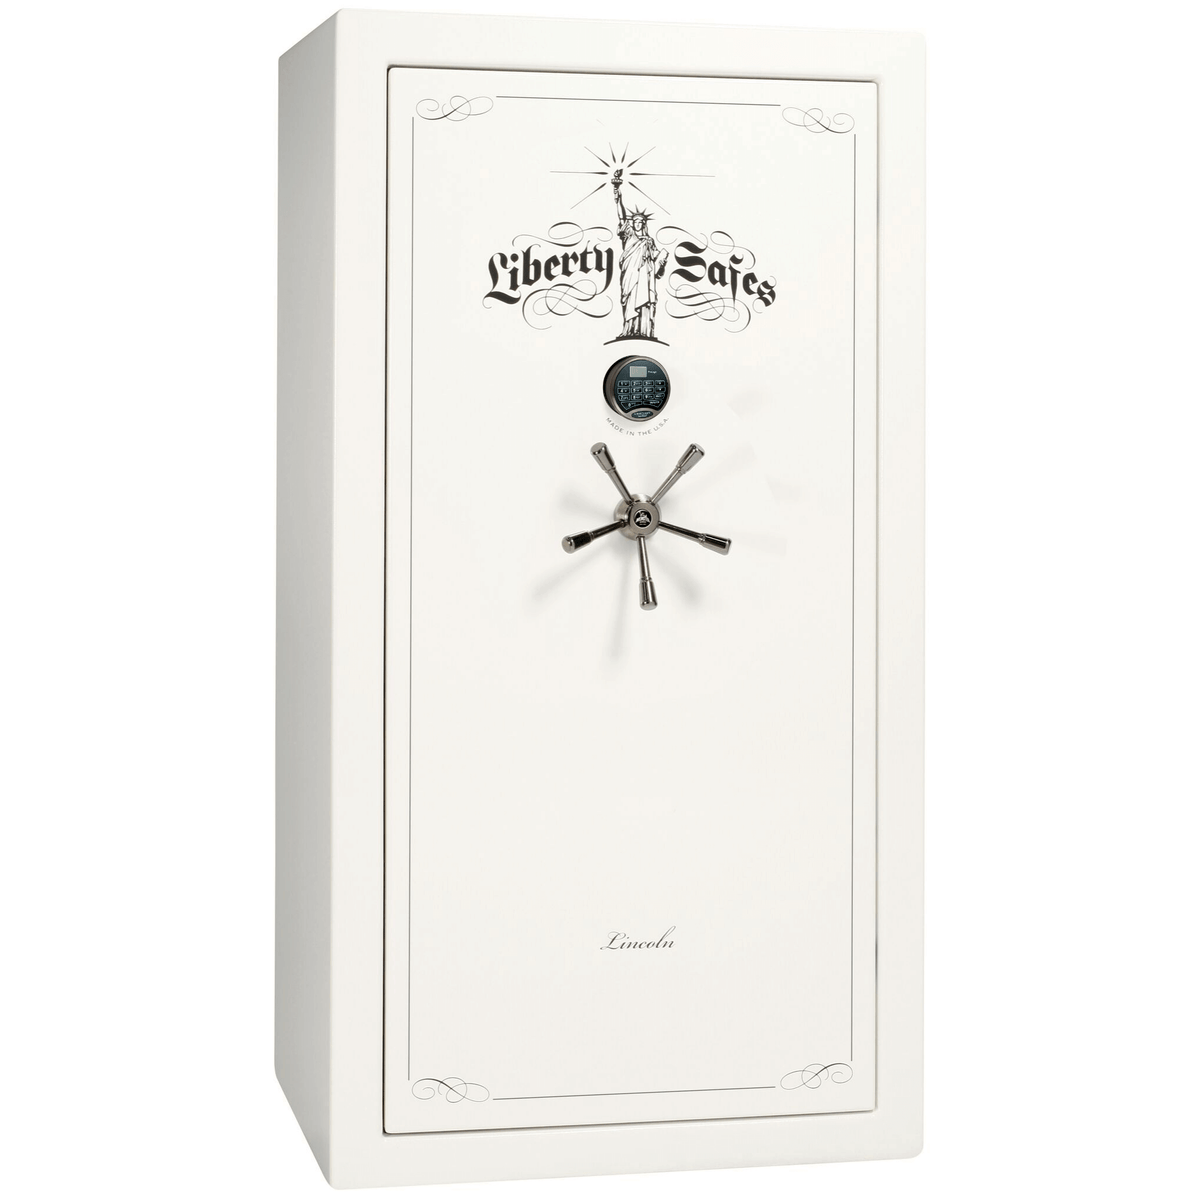 Liberty Lincoln 40 Safe in White Gloss with Black Chrome Electronic Lock.